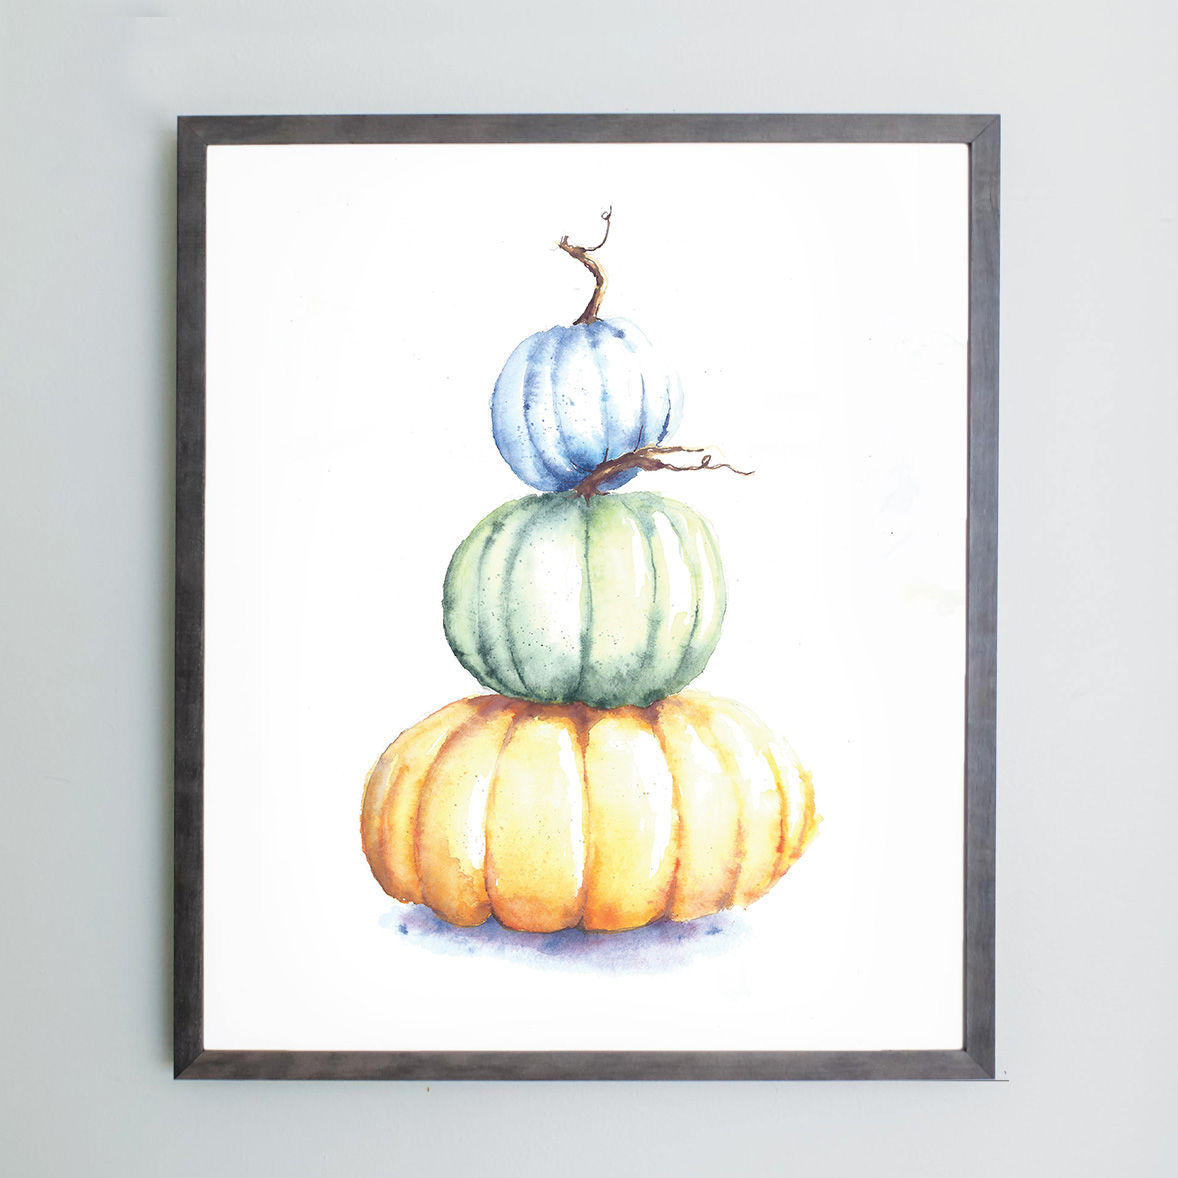 Watercolor of blue, green, and yellow pumpkin in a gray frame